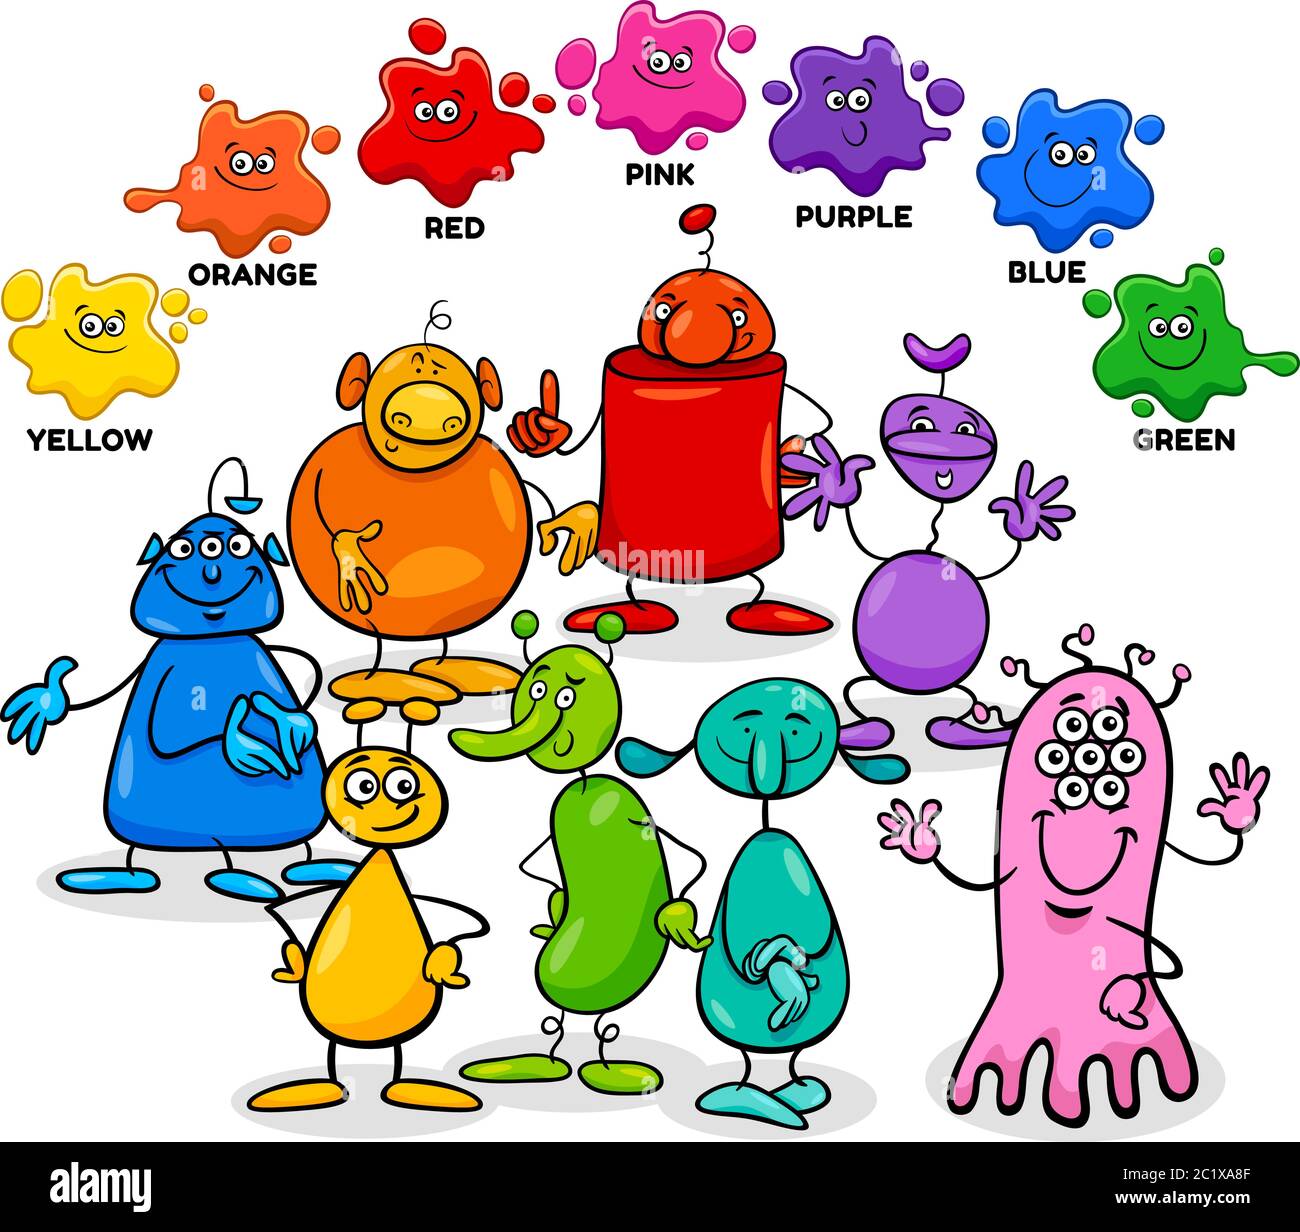 Educational Cartoon Illustration of Basic Colors with Aliens or Fantasy  Characters Group Stock Vector Image & Art - Alamy